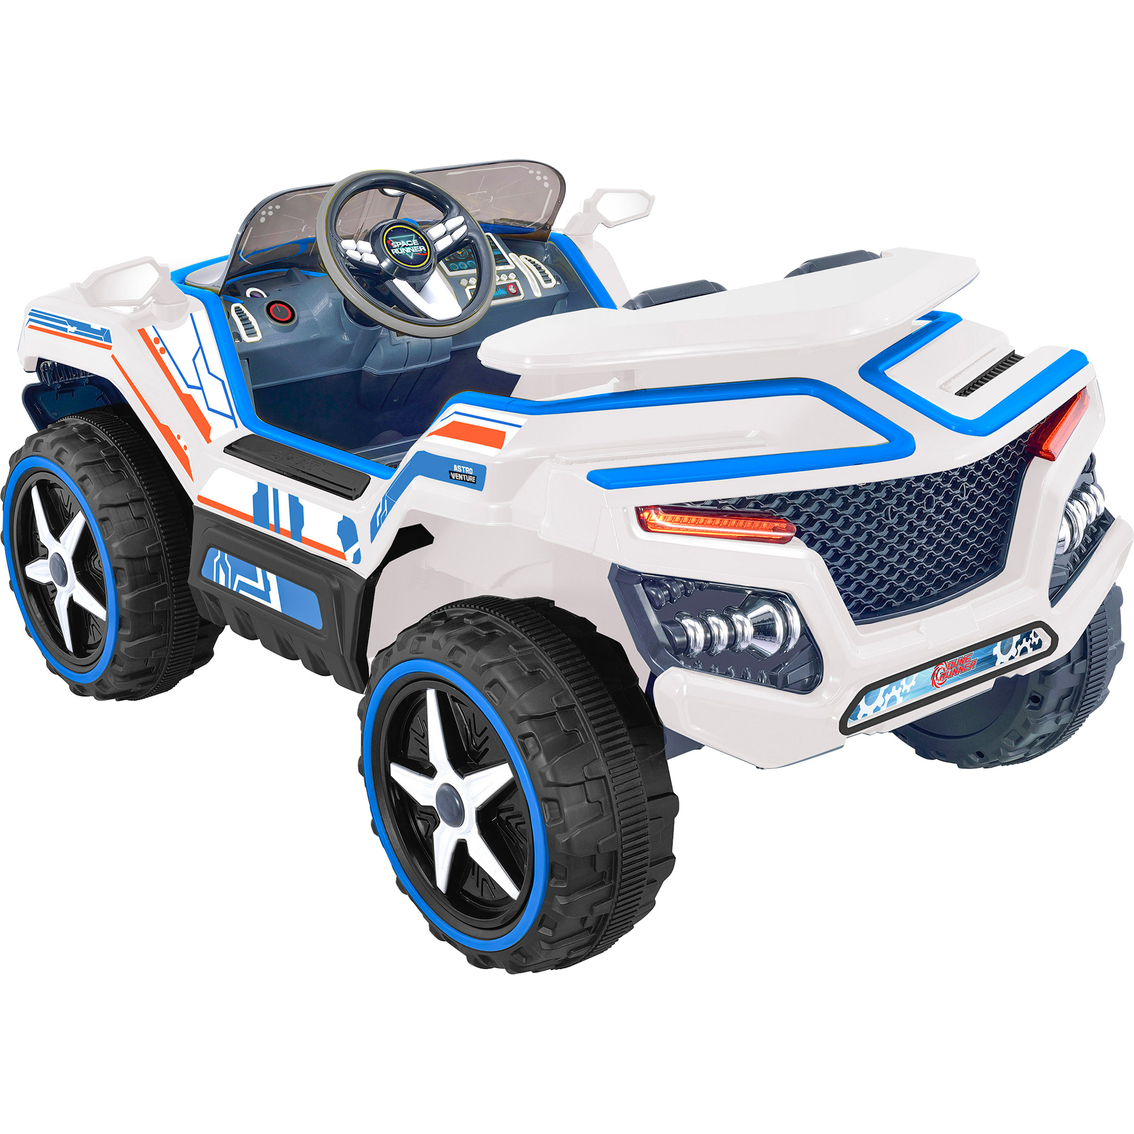 Kid Motorz Dune Runner 2 Seater Space Adventure 12V Ride On Toy - Image 2 of 4